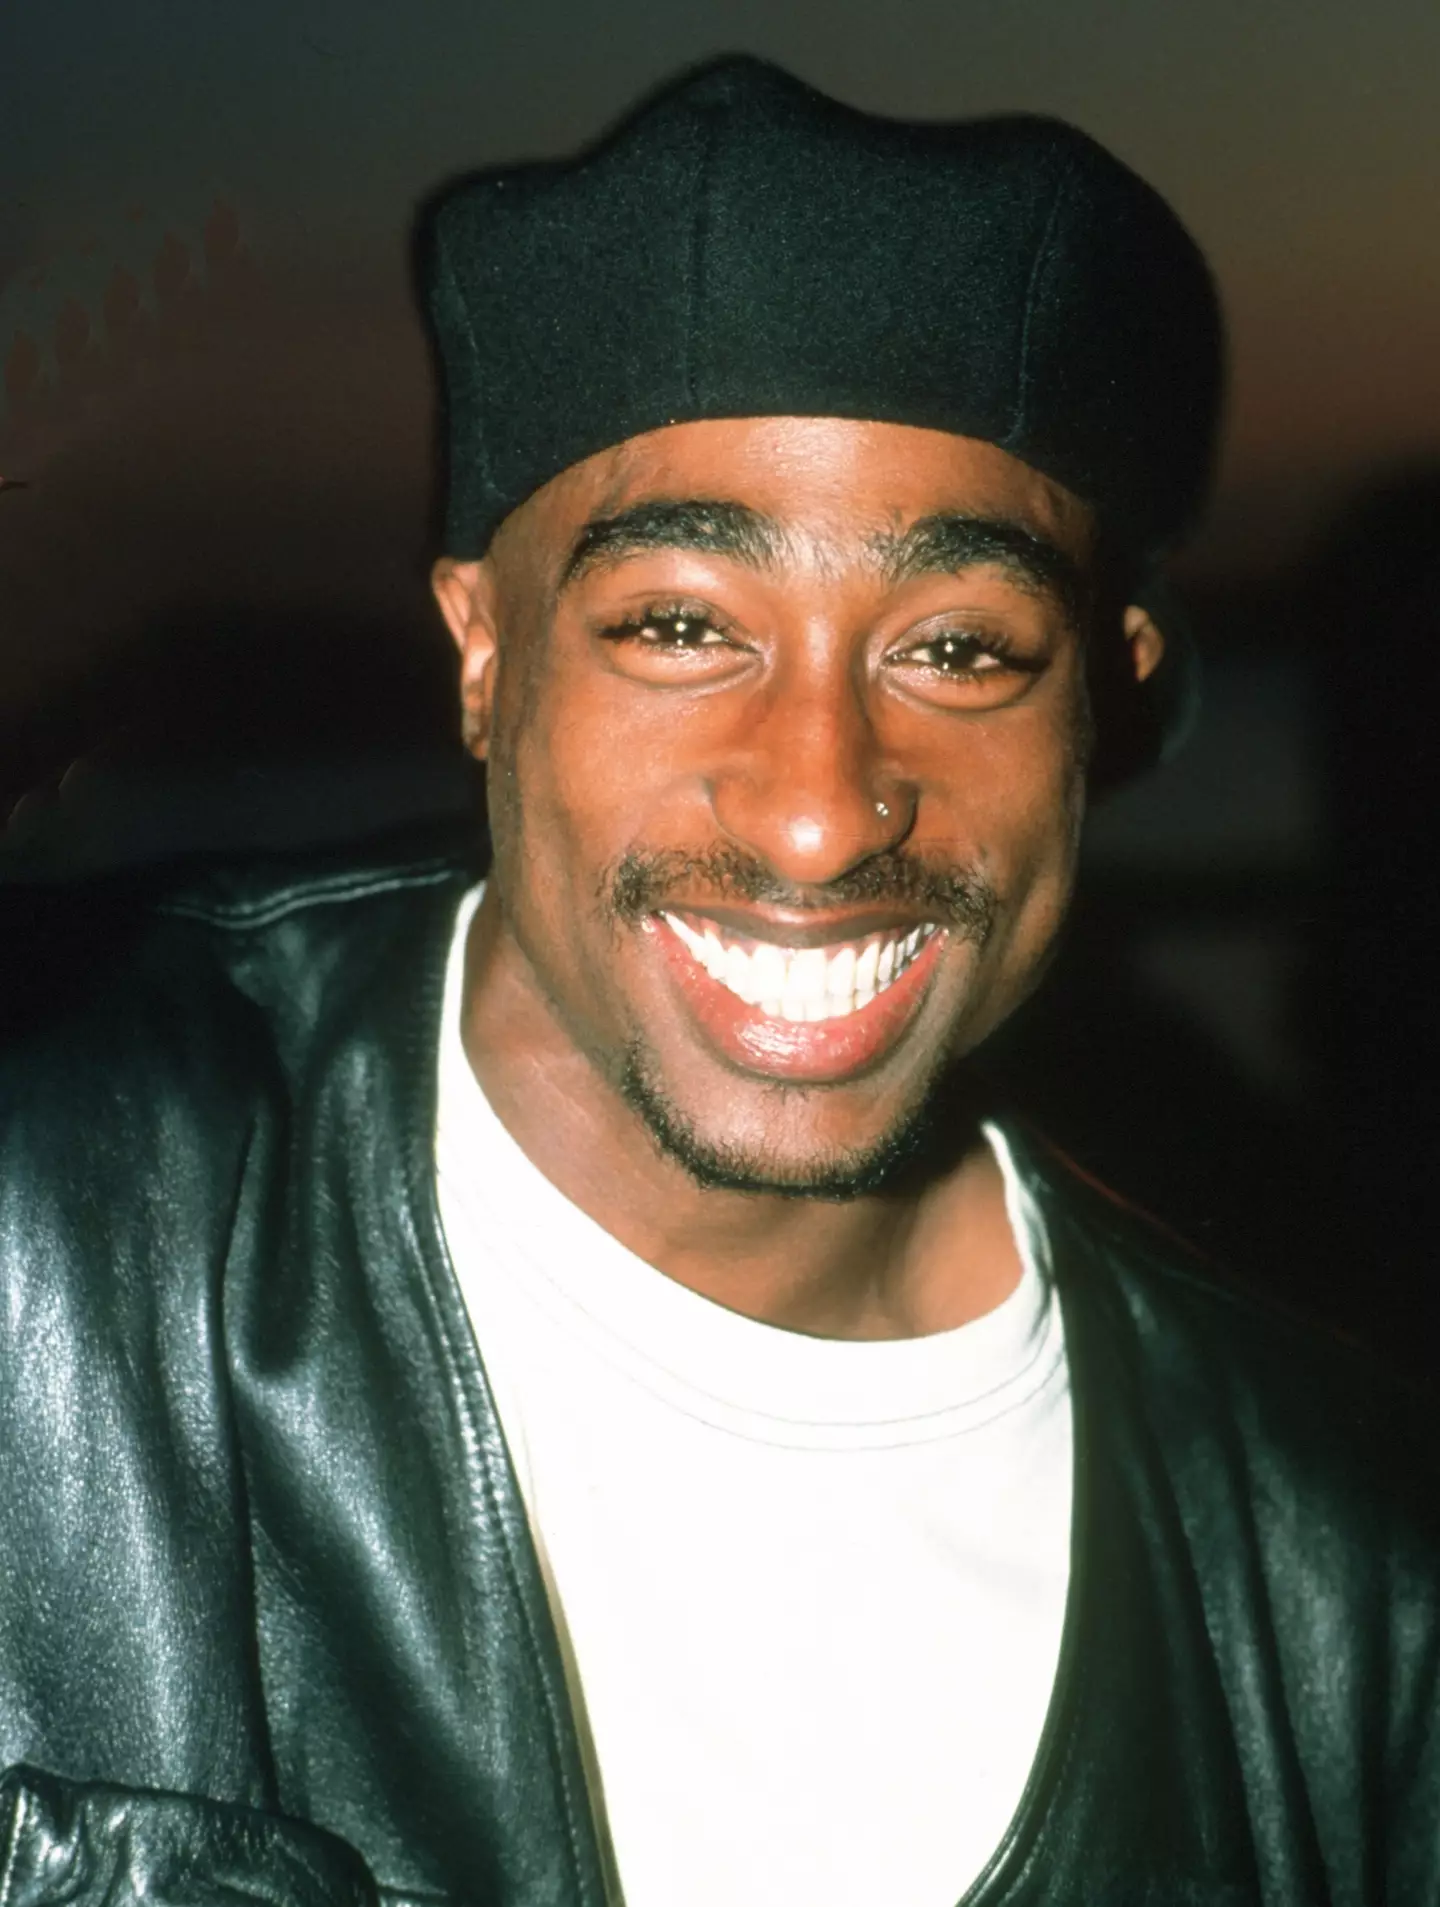 Fellow rapper E.D.I Mean was also in the car and revealed Tupac's last words. Al Pereira/Michael Ochs Archives/Getty Images